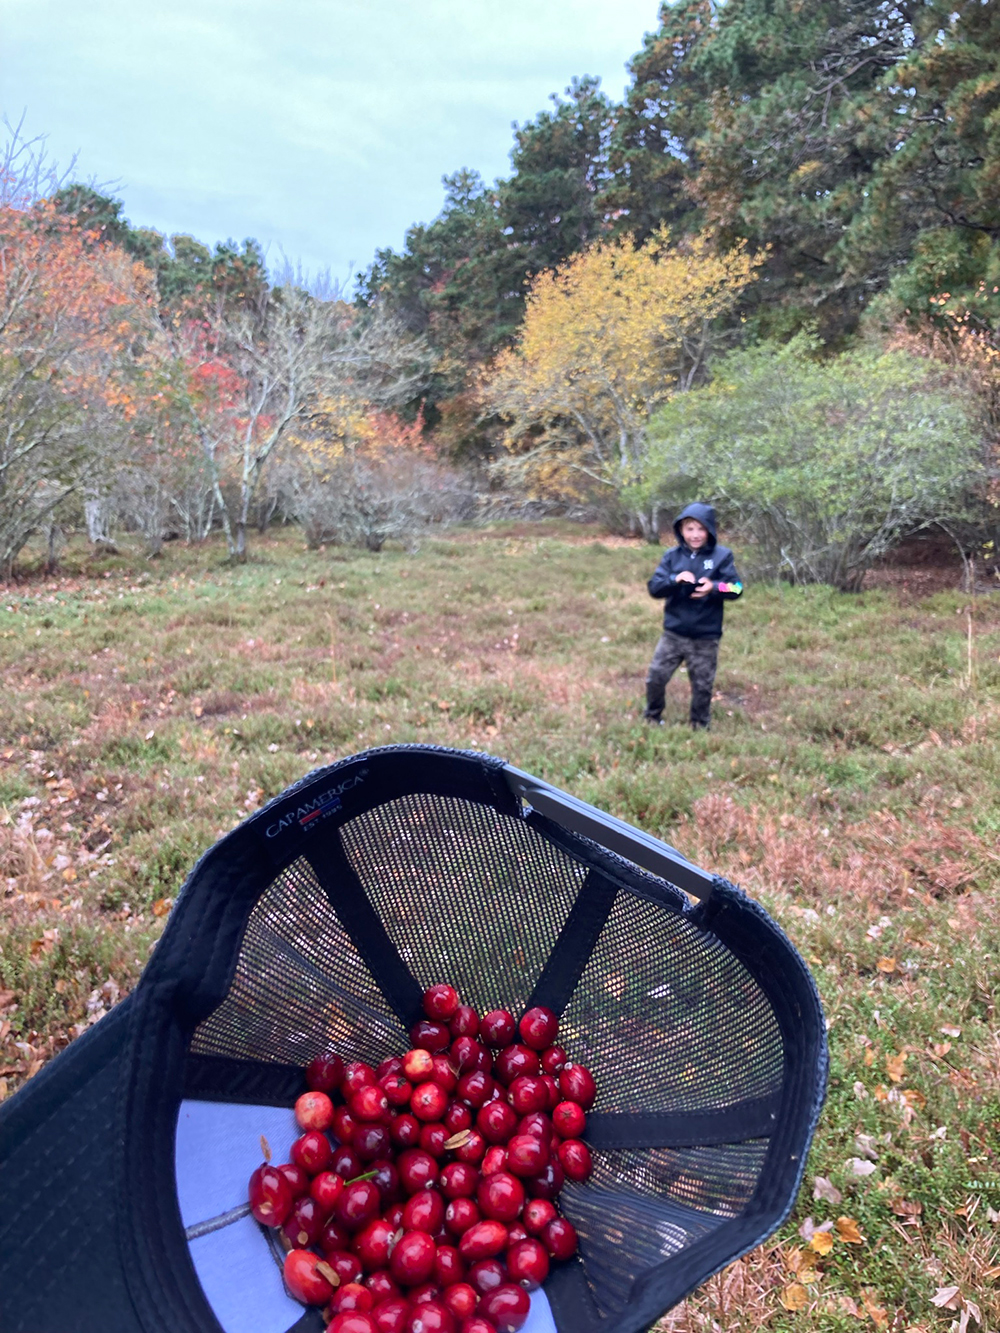 Cranberries collected in a hat at Fresh Pond